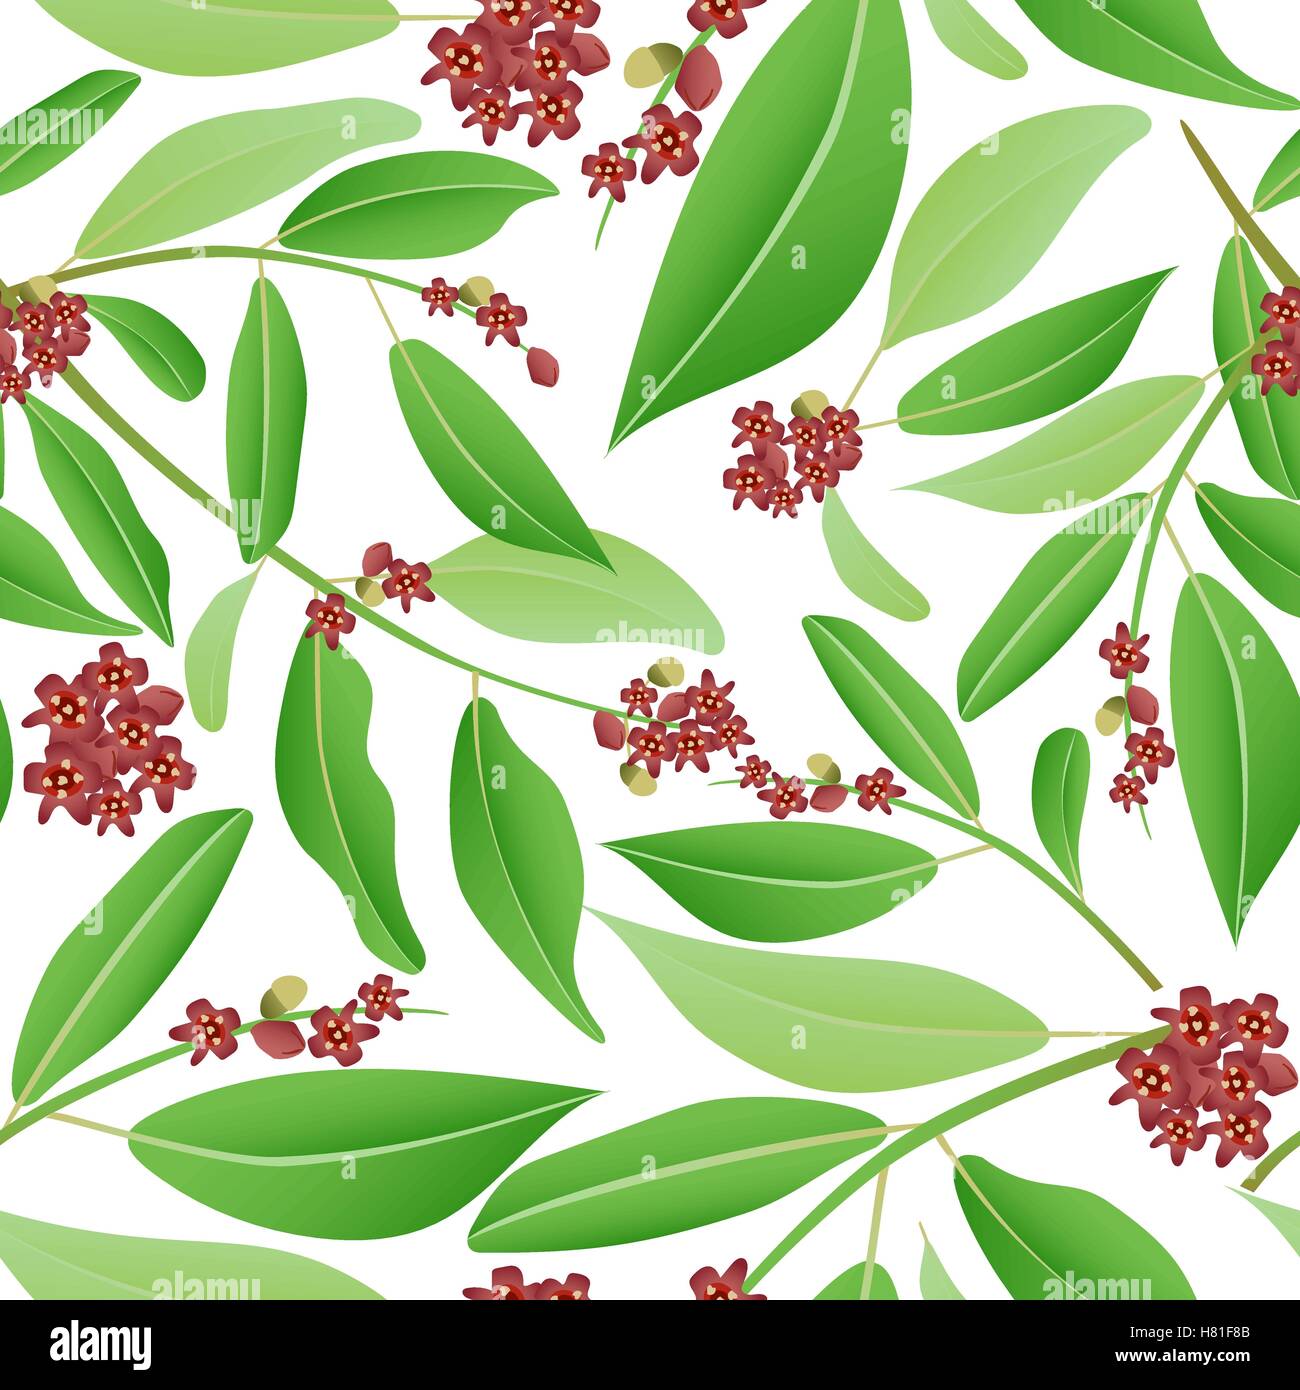 Floral seamless pattern sandalwood. Sandalwood tree branch with red flowers and green leaves. Vector illustration can be used in Stock Vector